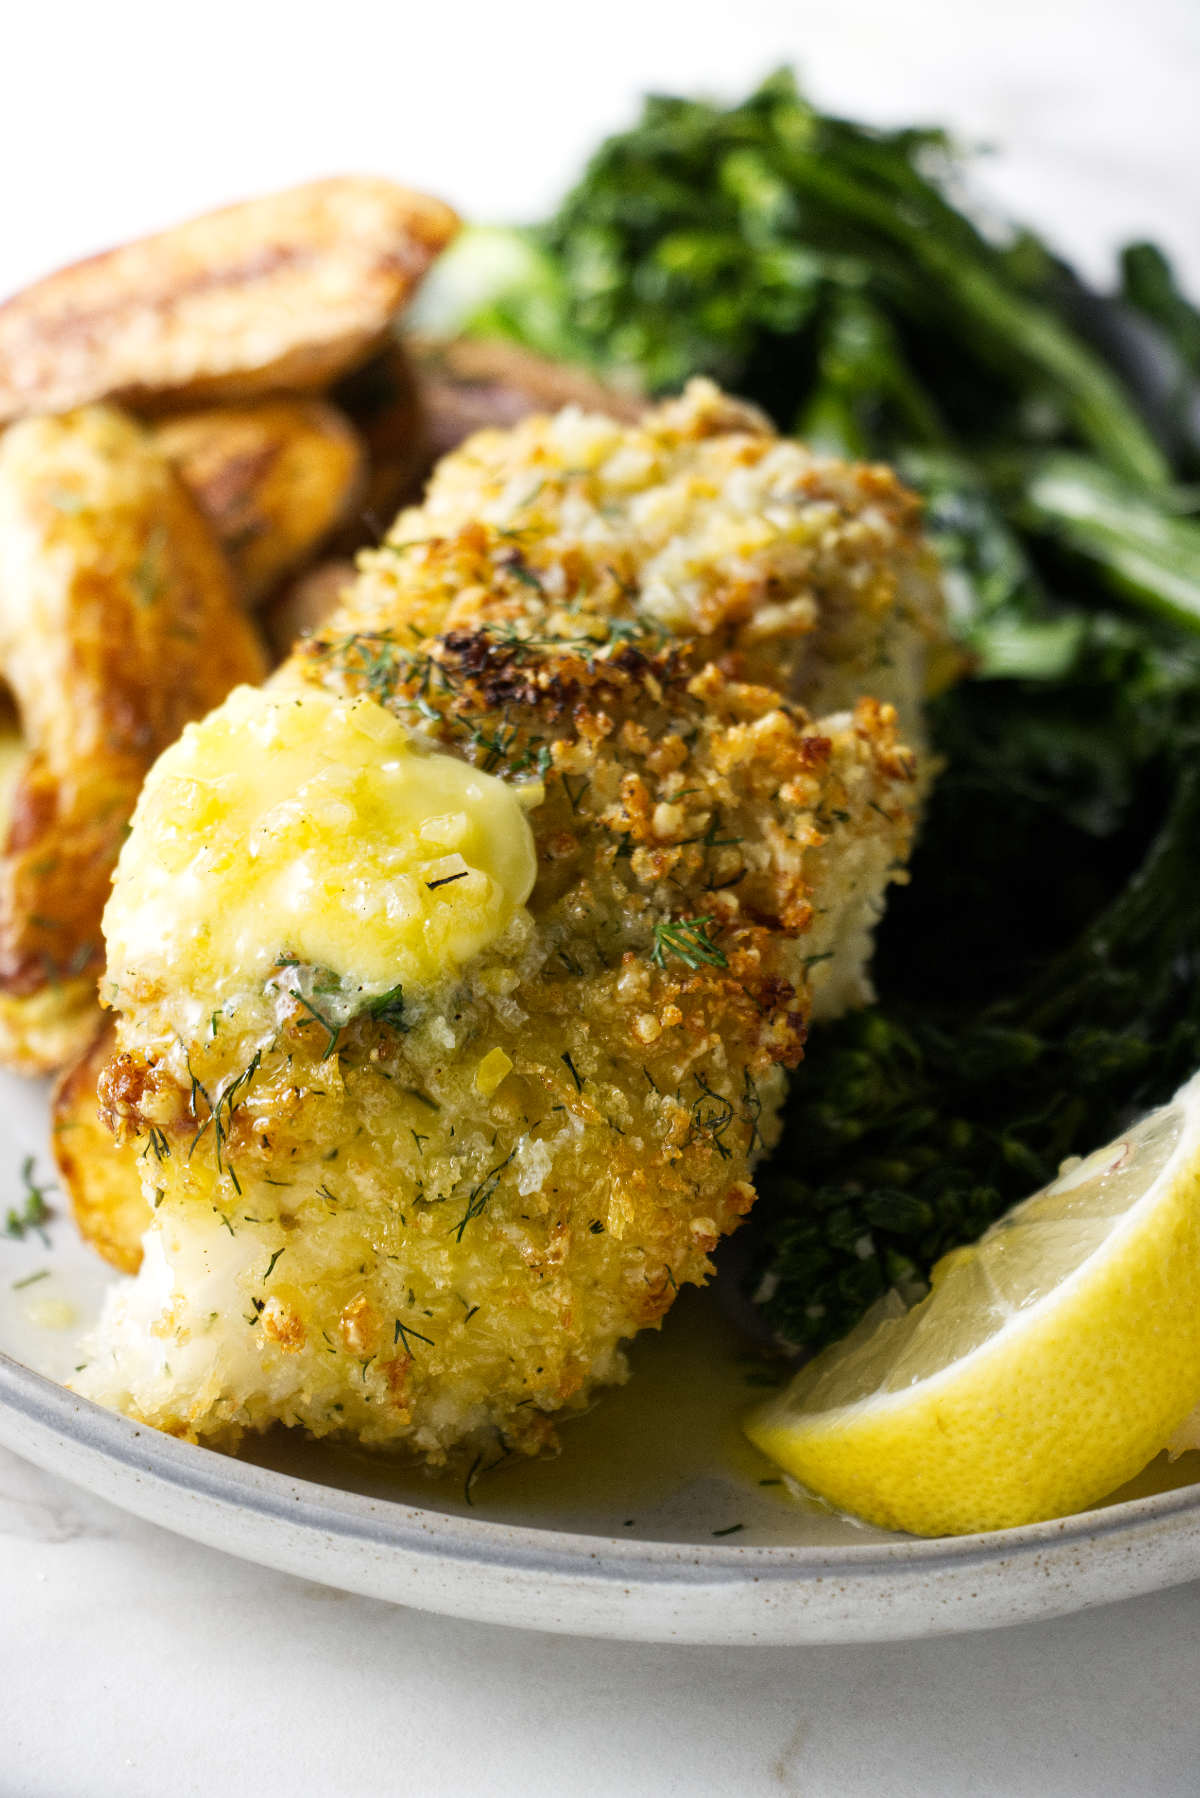 A cooked haddock with panko parmesan crust.